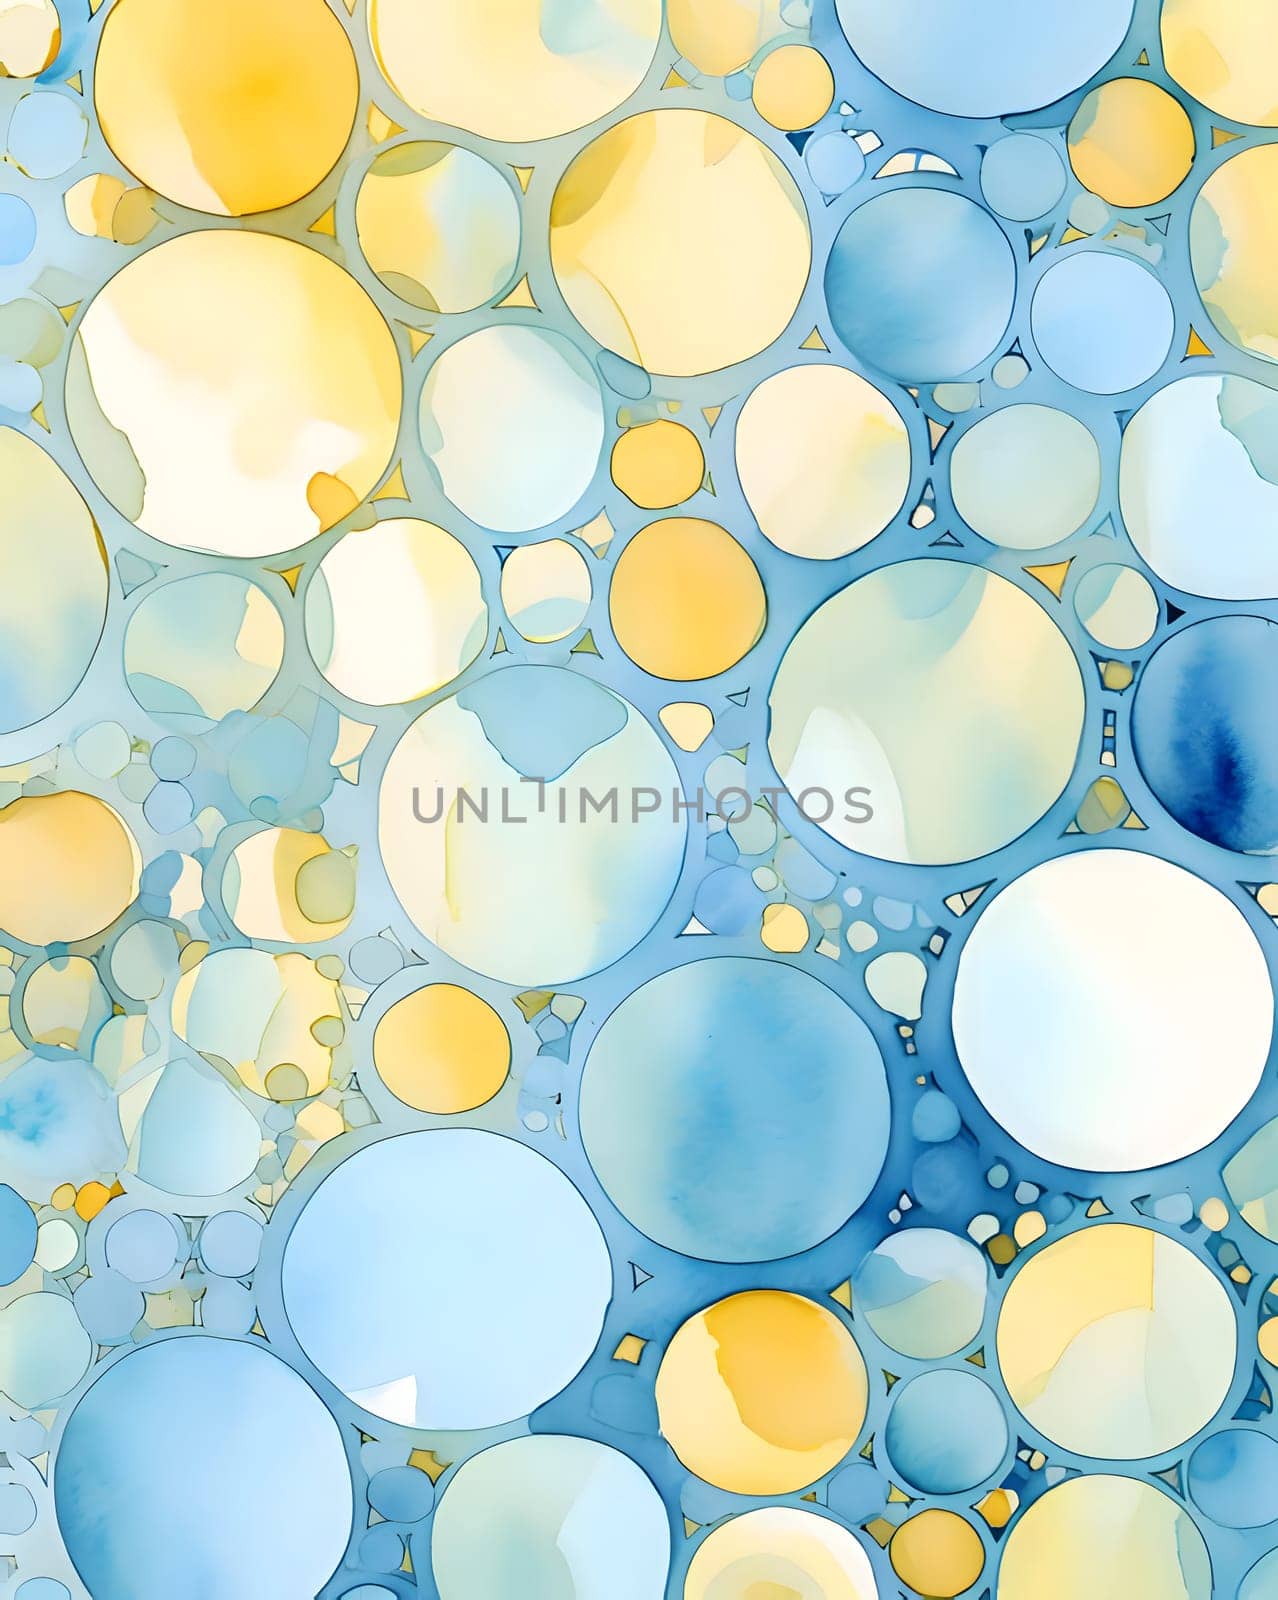 Patterns and banners backgrounds: Abstract watercolor seamless pattern with circles in blue and yellow colors.